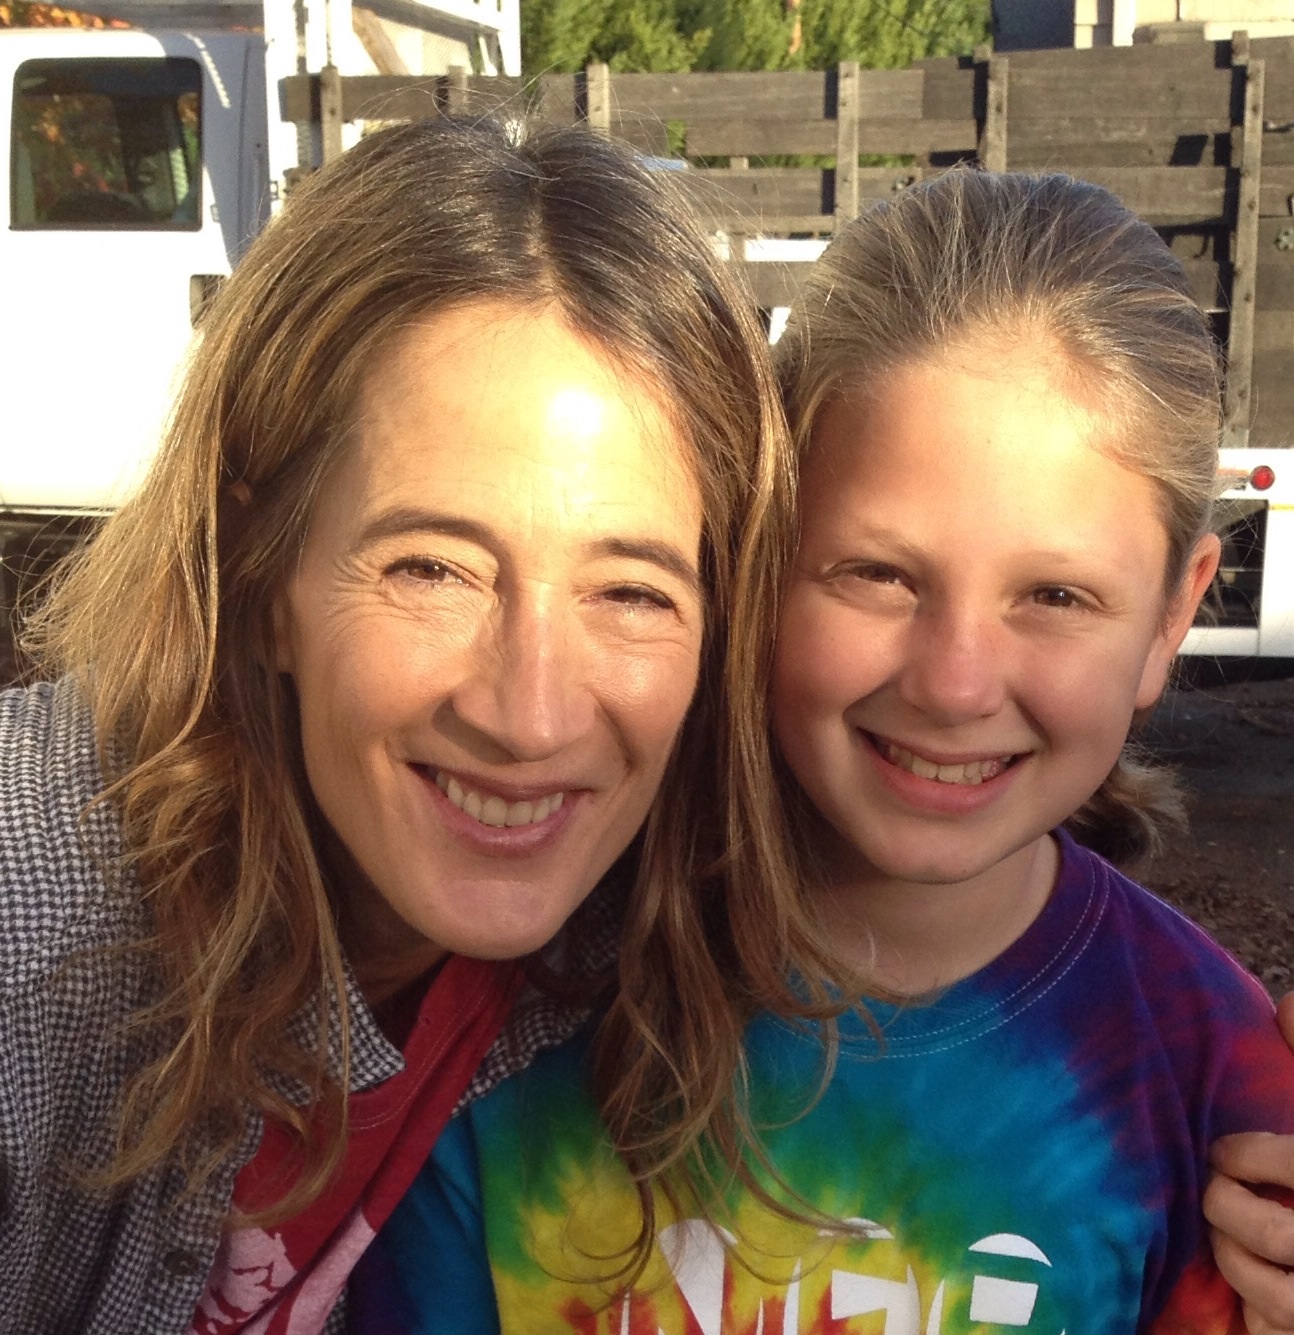 Sophia having fun on the set of The Taking with the amazing Anne Ramsay.